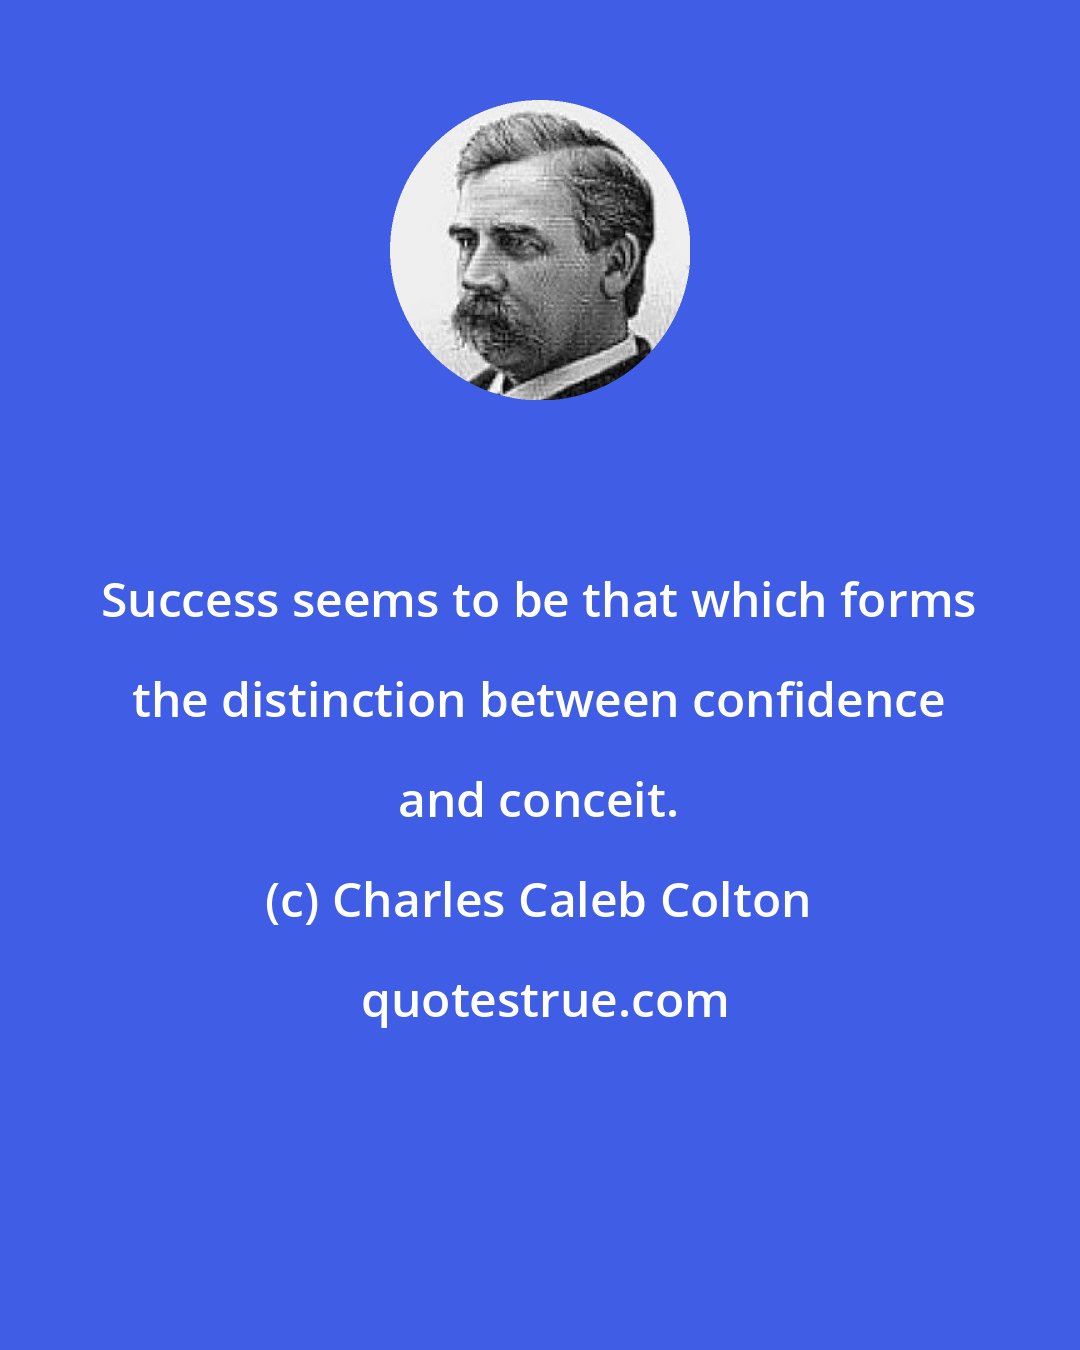 Charles Caleb Colton: Success seems to be that which forms the distinction between confidence and conceit.